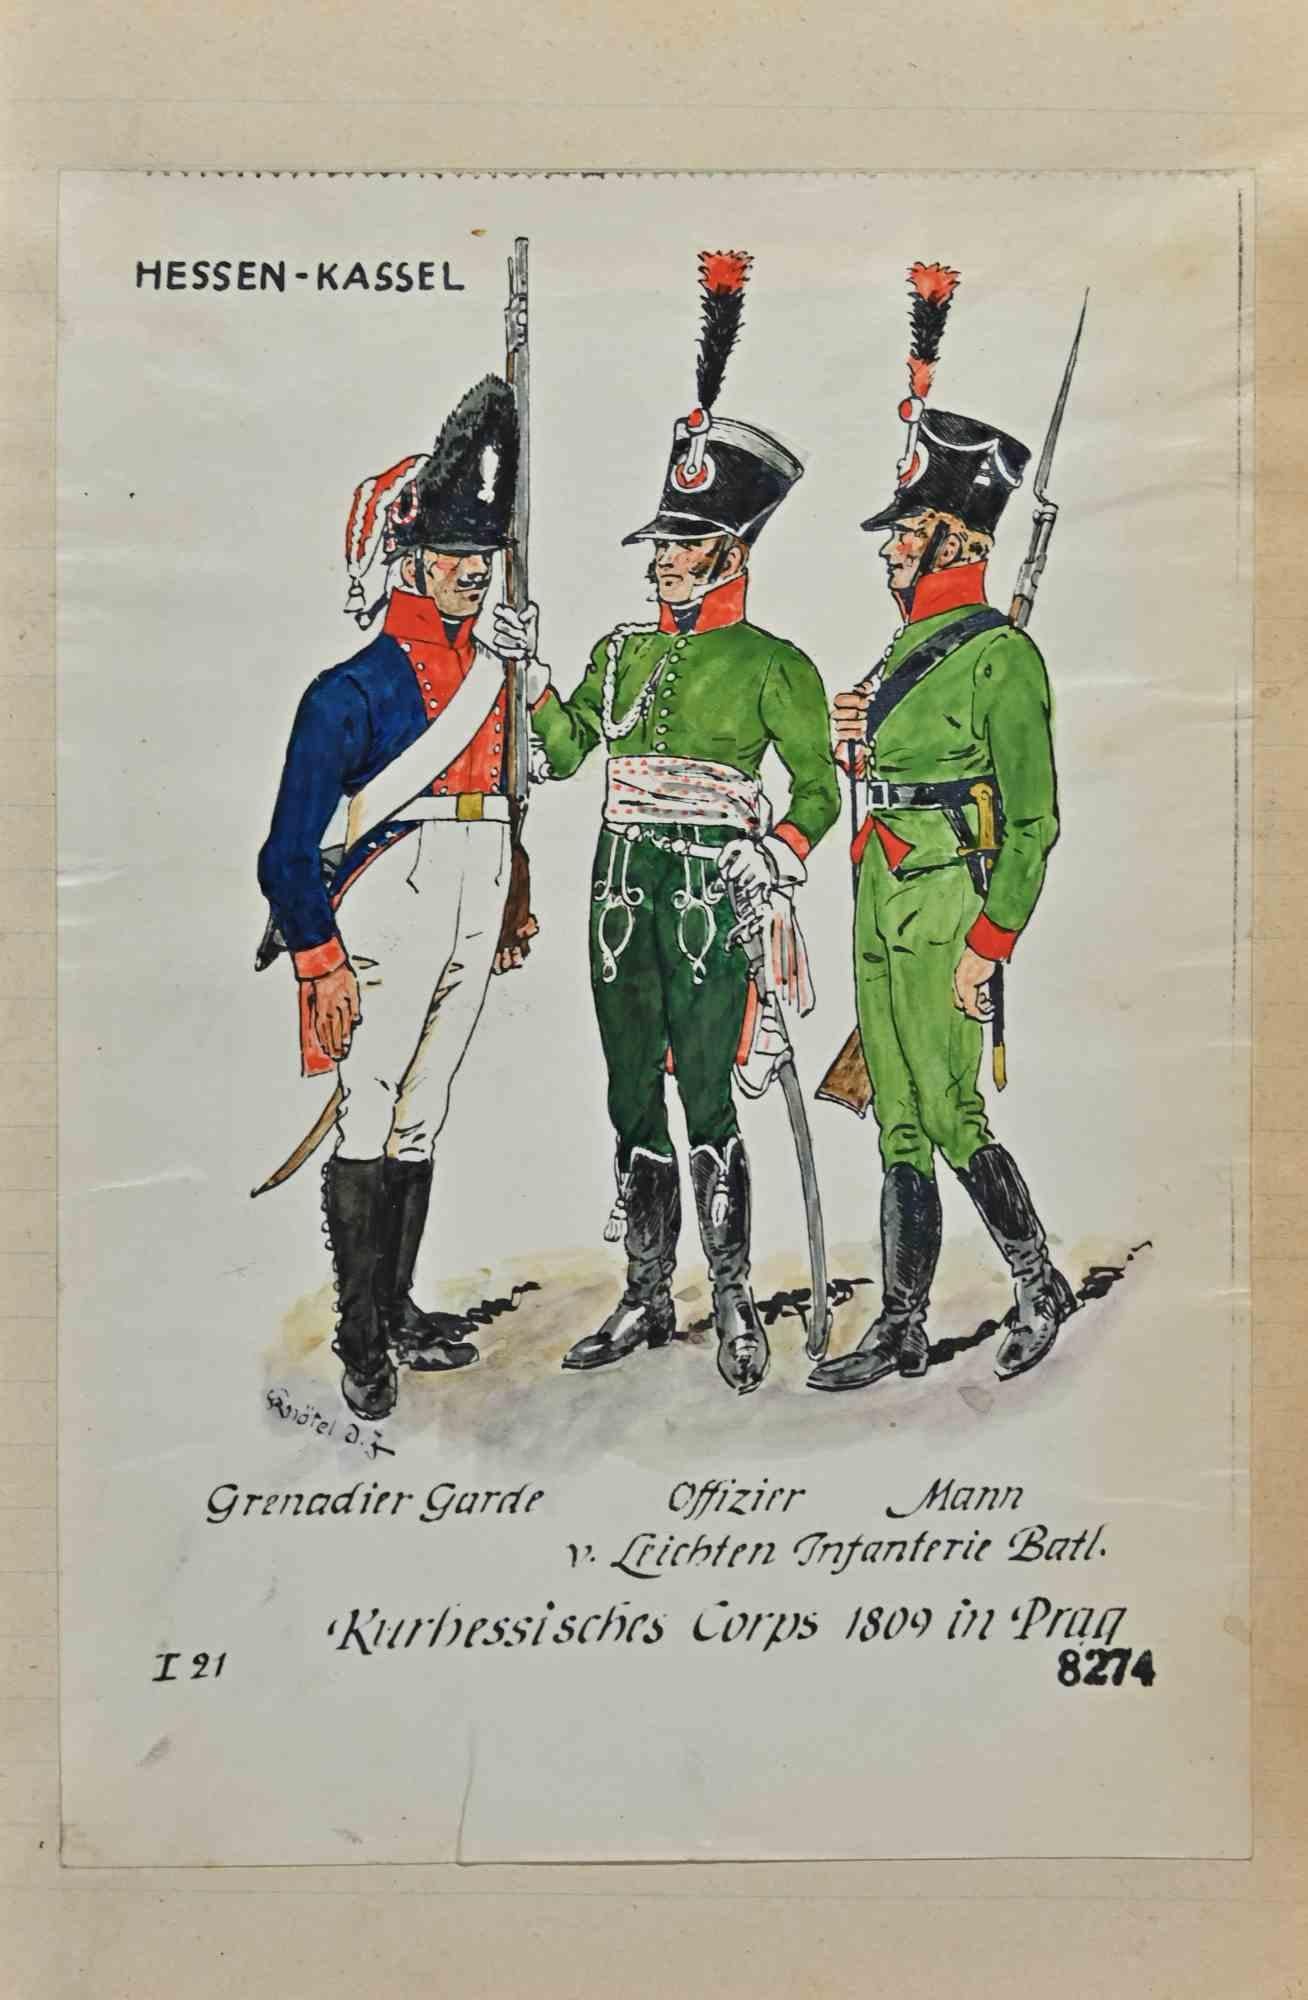 Kurhessisches Corps is an original drawing in ink and watercolor realized by Herbert Knotel in 1930/40s.

Good condition except for being aged.

Hand-signed.

The artwork is depicted through strong lines in well-balanced conditions.

Herbert Knotel